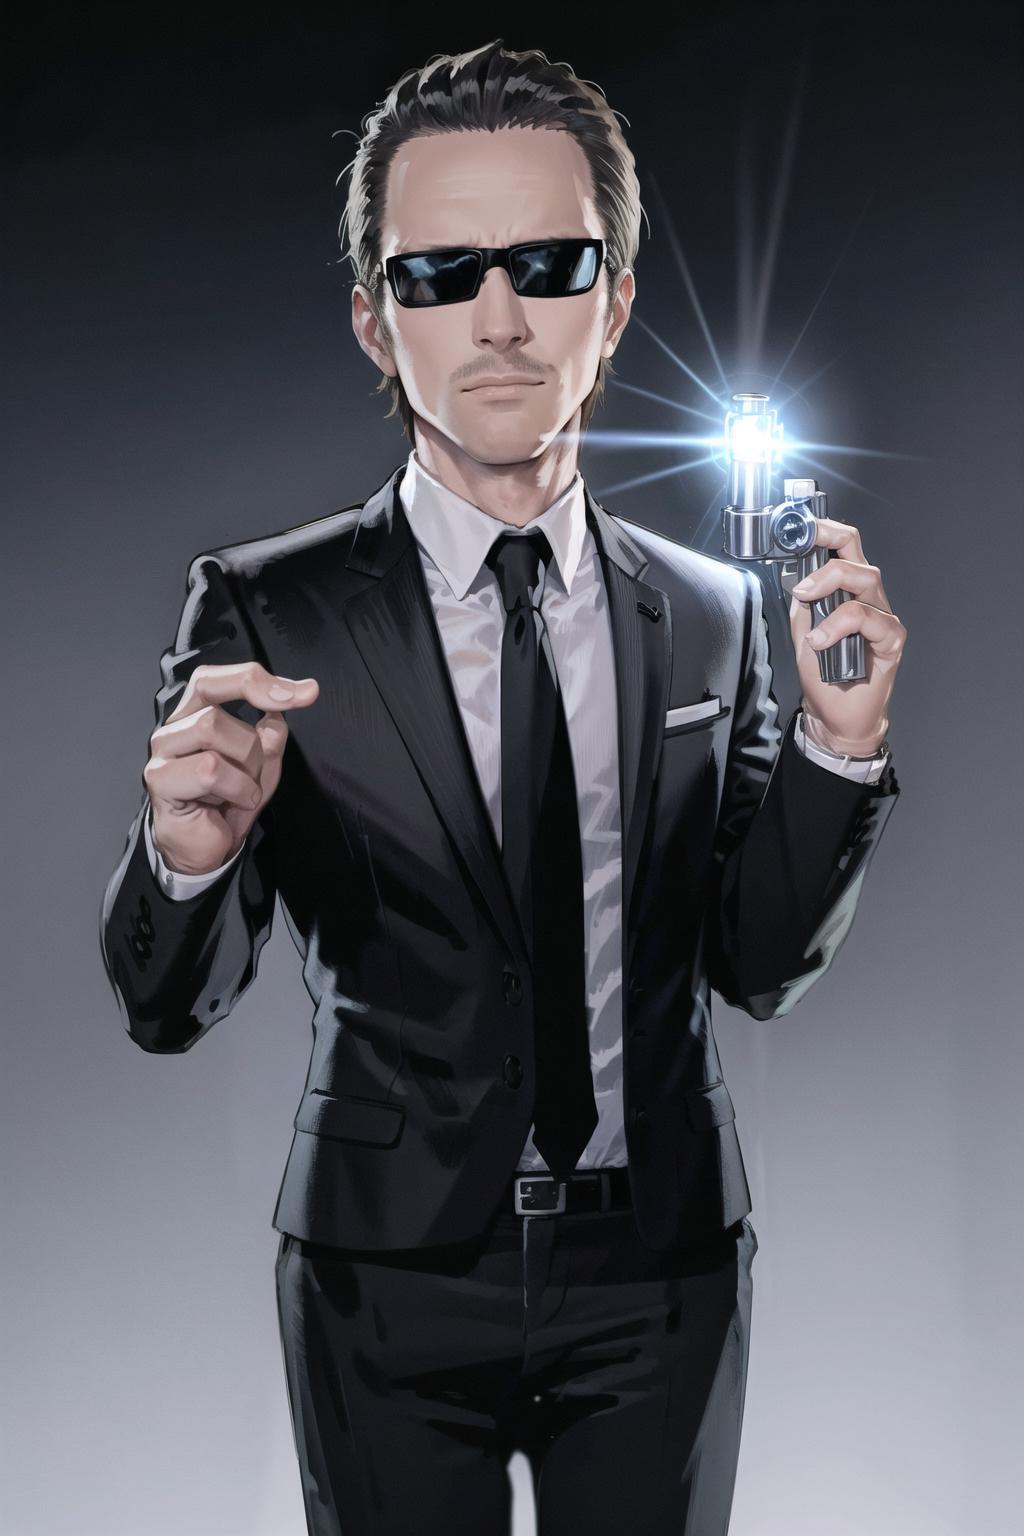 MIB Suit and Neuralyzer image by rulles